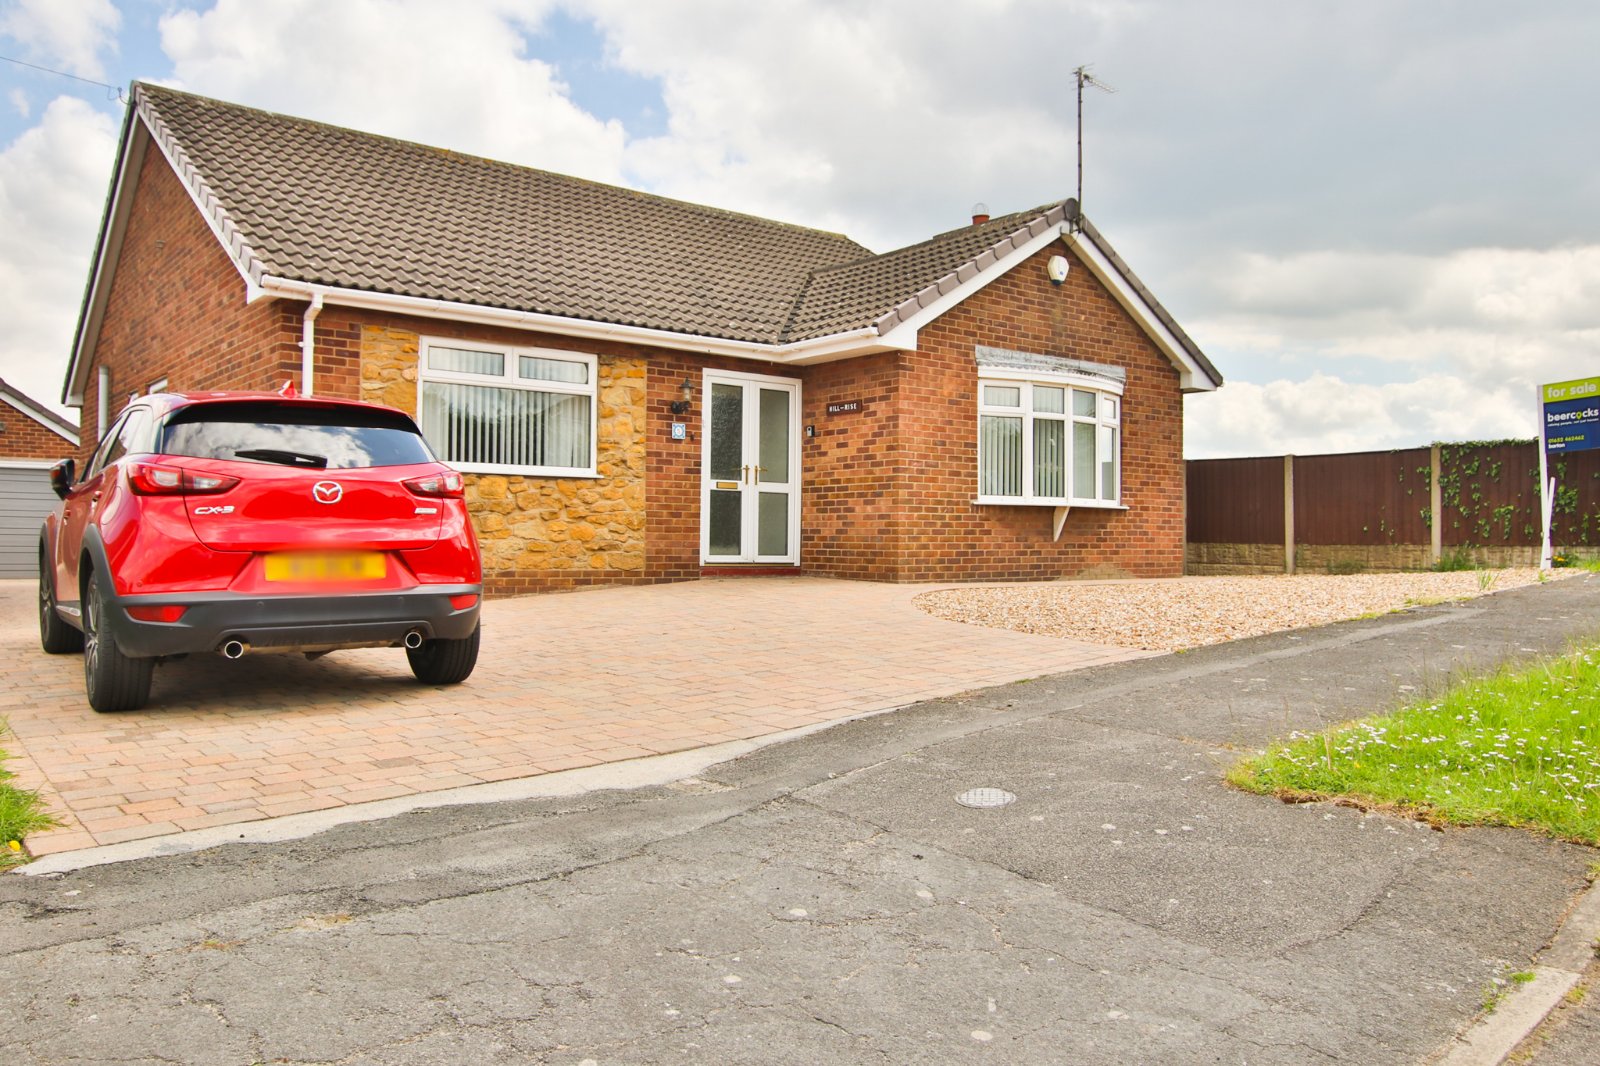 3 bed bungalow for sale in Cornhill Drive, Barton-upon-Humber, DN18